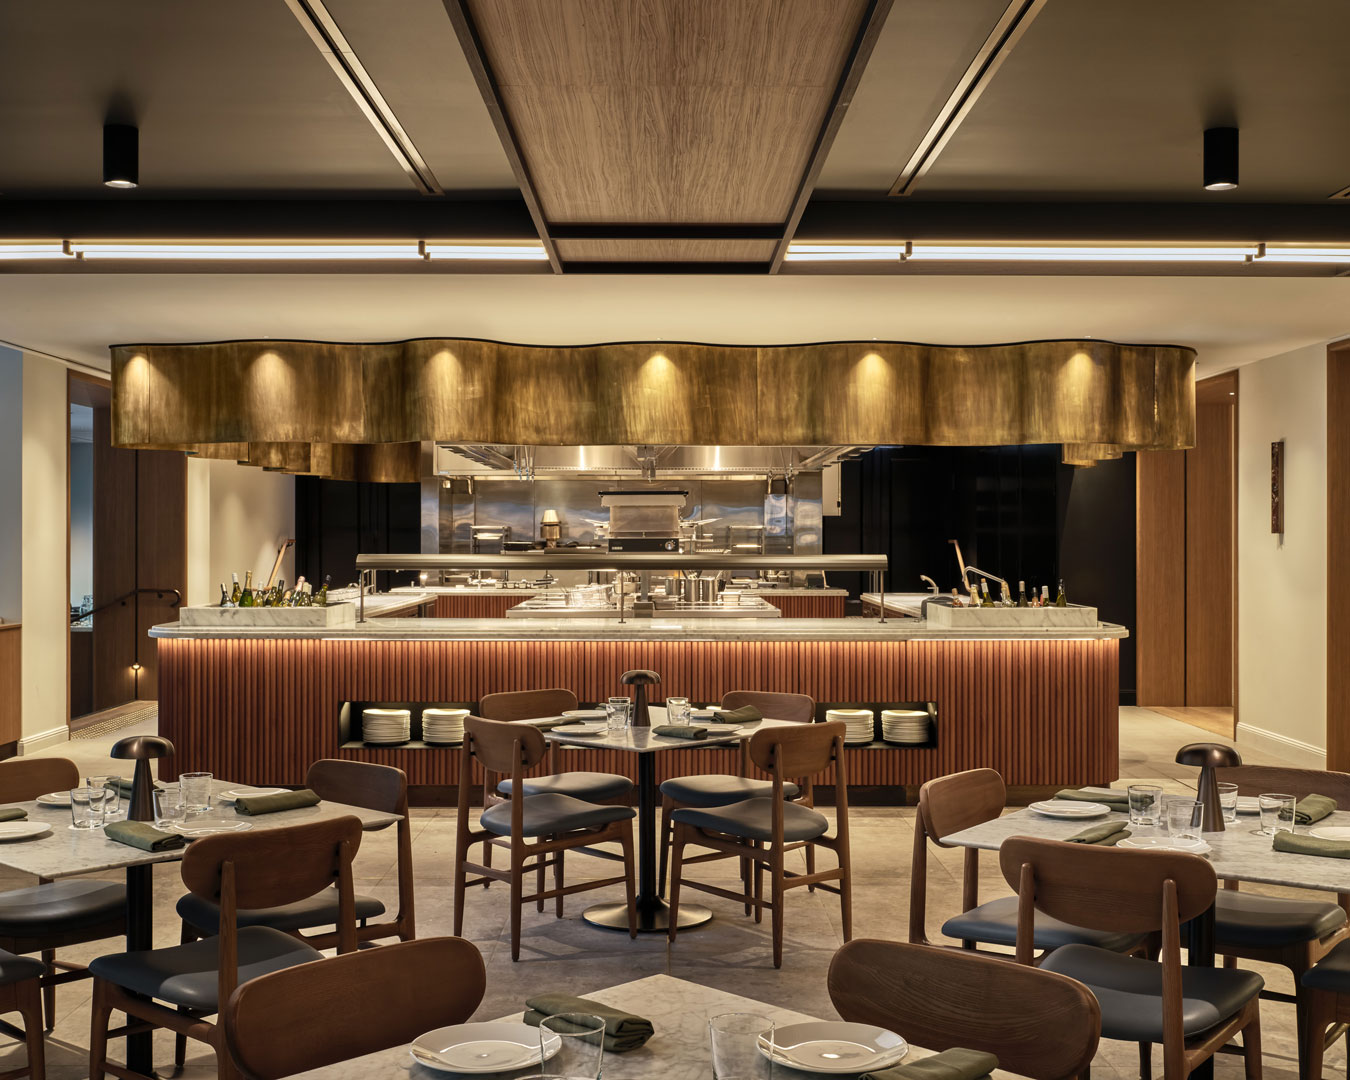 The dining room at Sydney Common, a new restaurant in Sydney